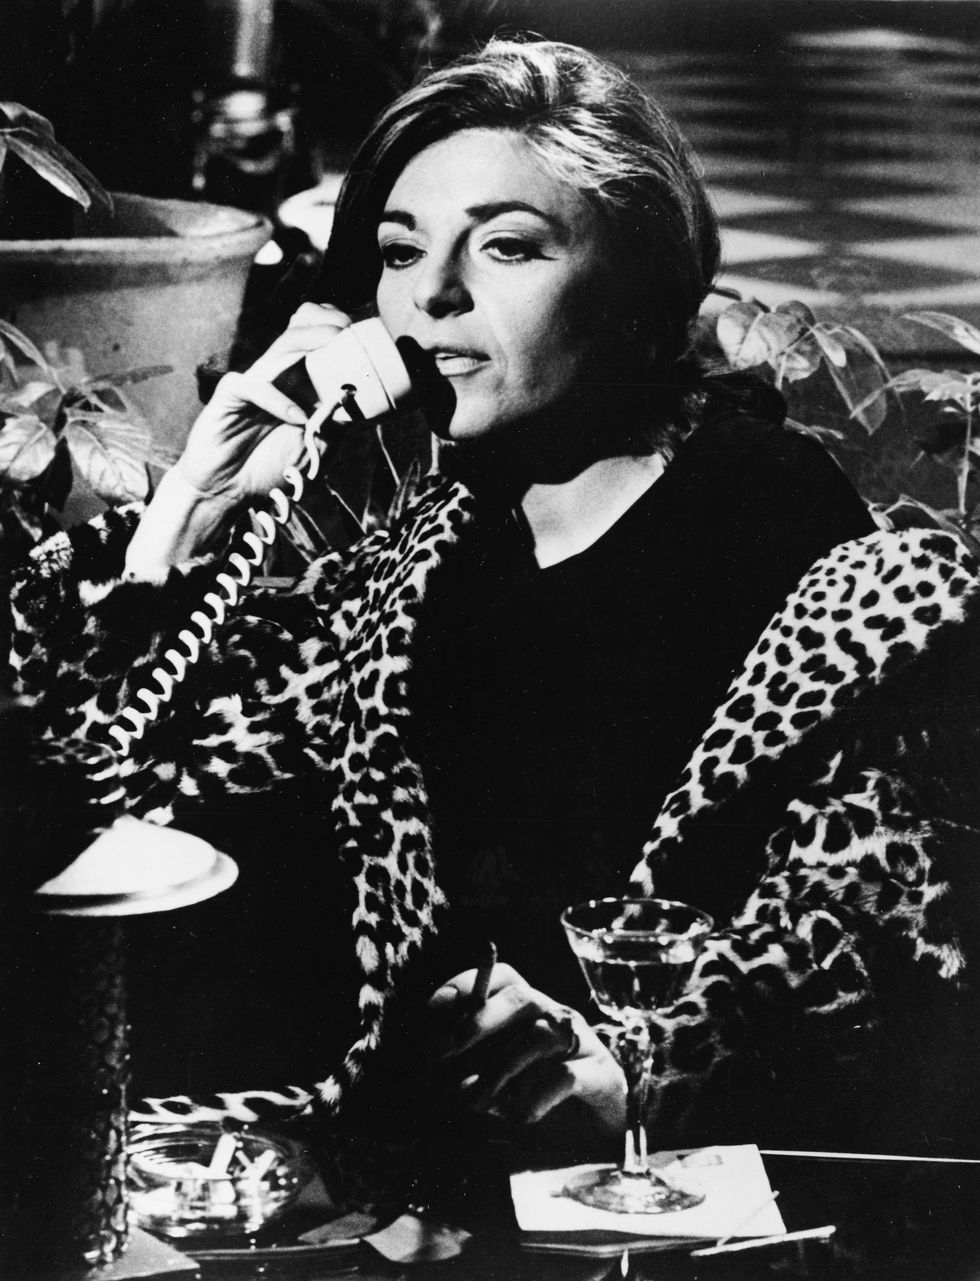 american actress anne bancroft 1931 2005 wears a leopard print coat as she talks on the phone, drinks, and smokes in character as the seductive older woman, mrs robinson, in a still from the film the graduate directed by mike nichols, california, 1967 photo by embassy picturesmgm studioscourtesy of getty images